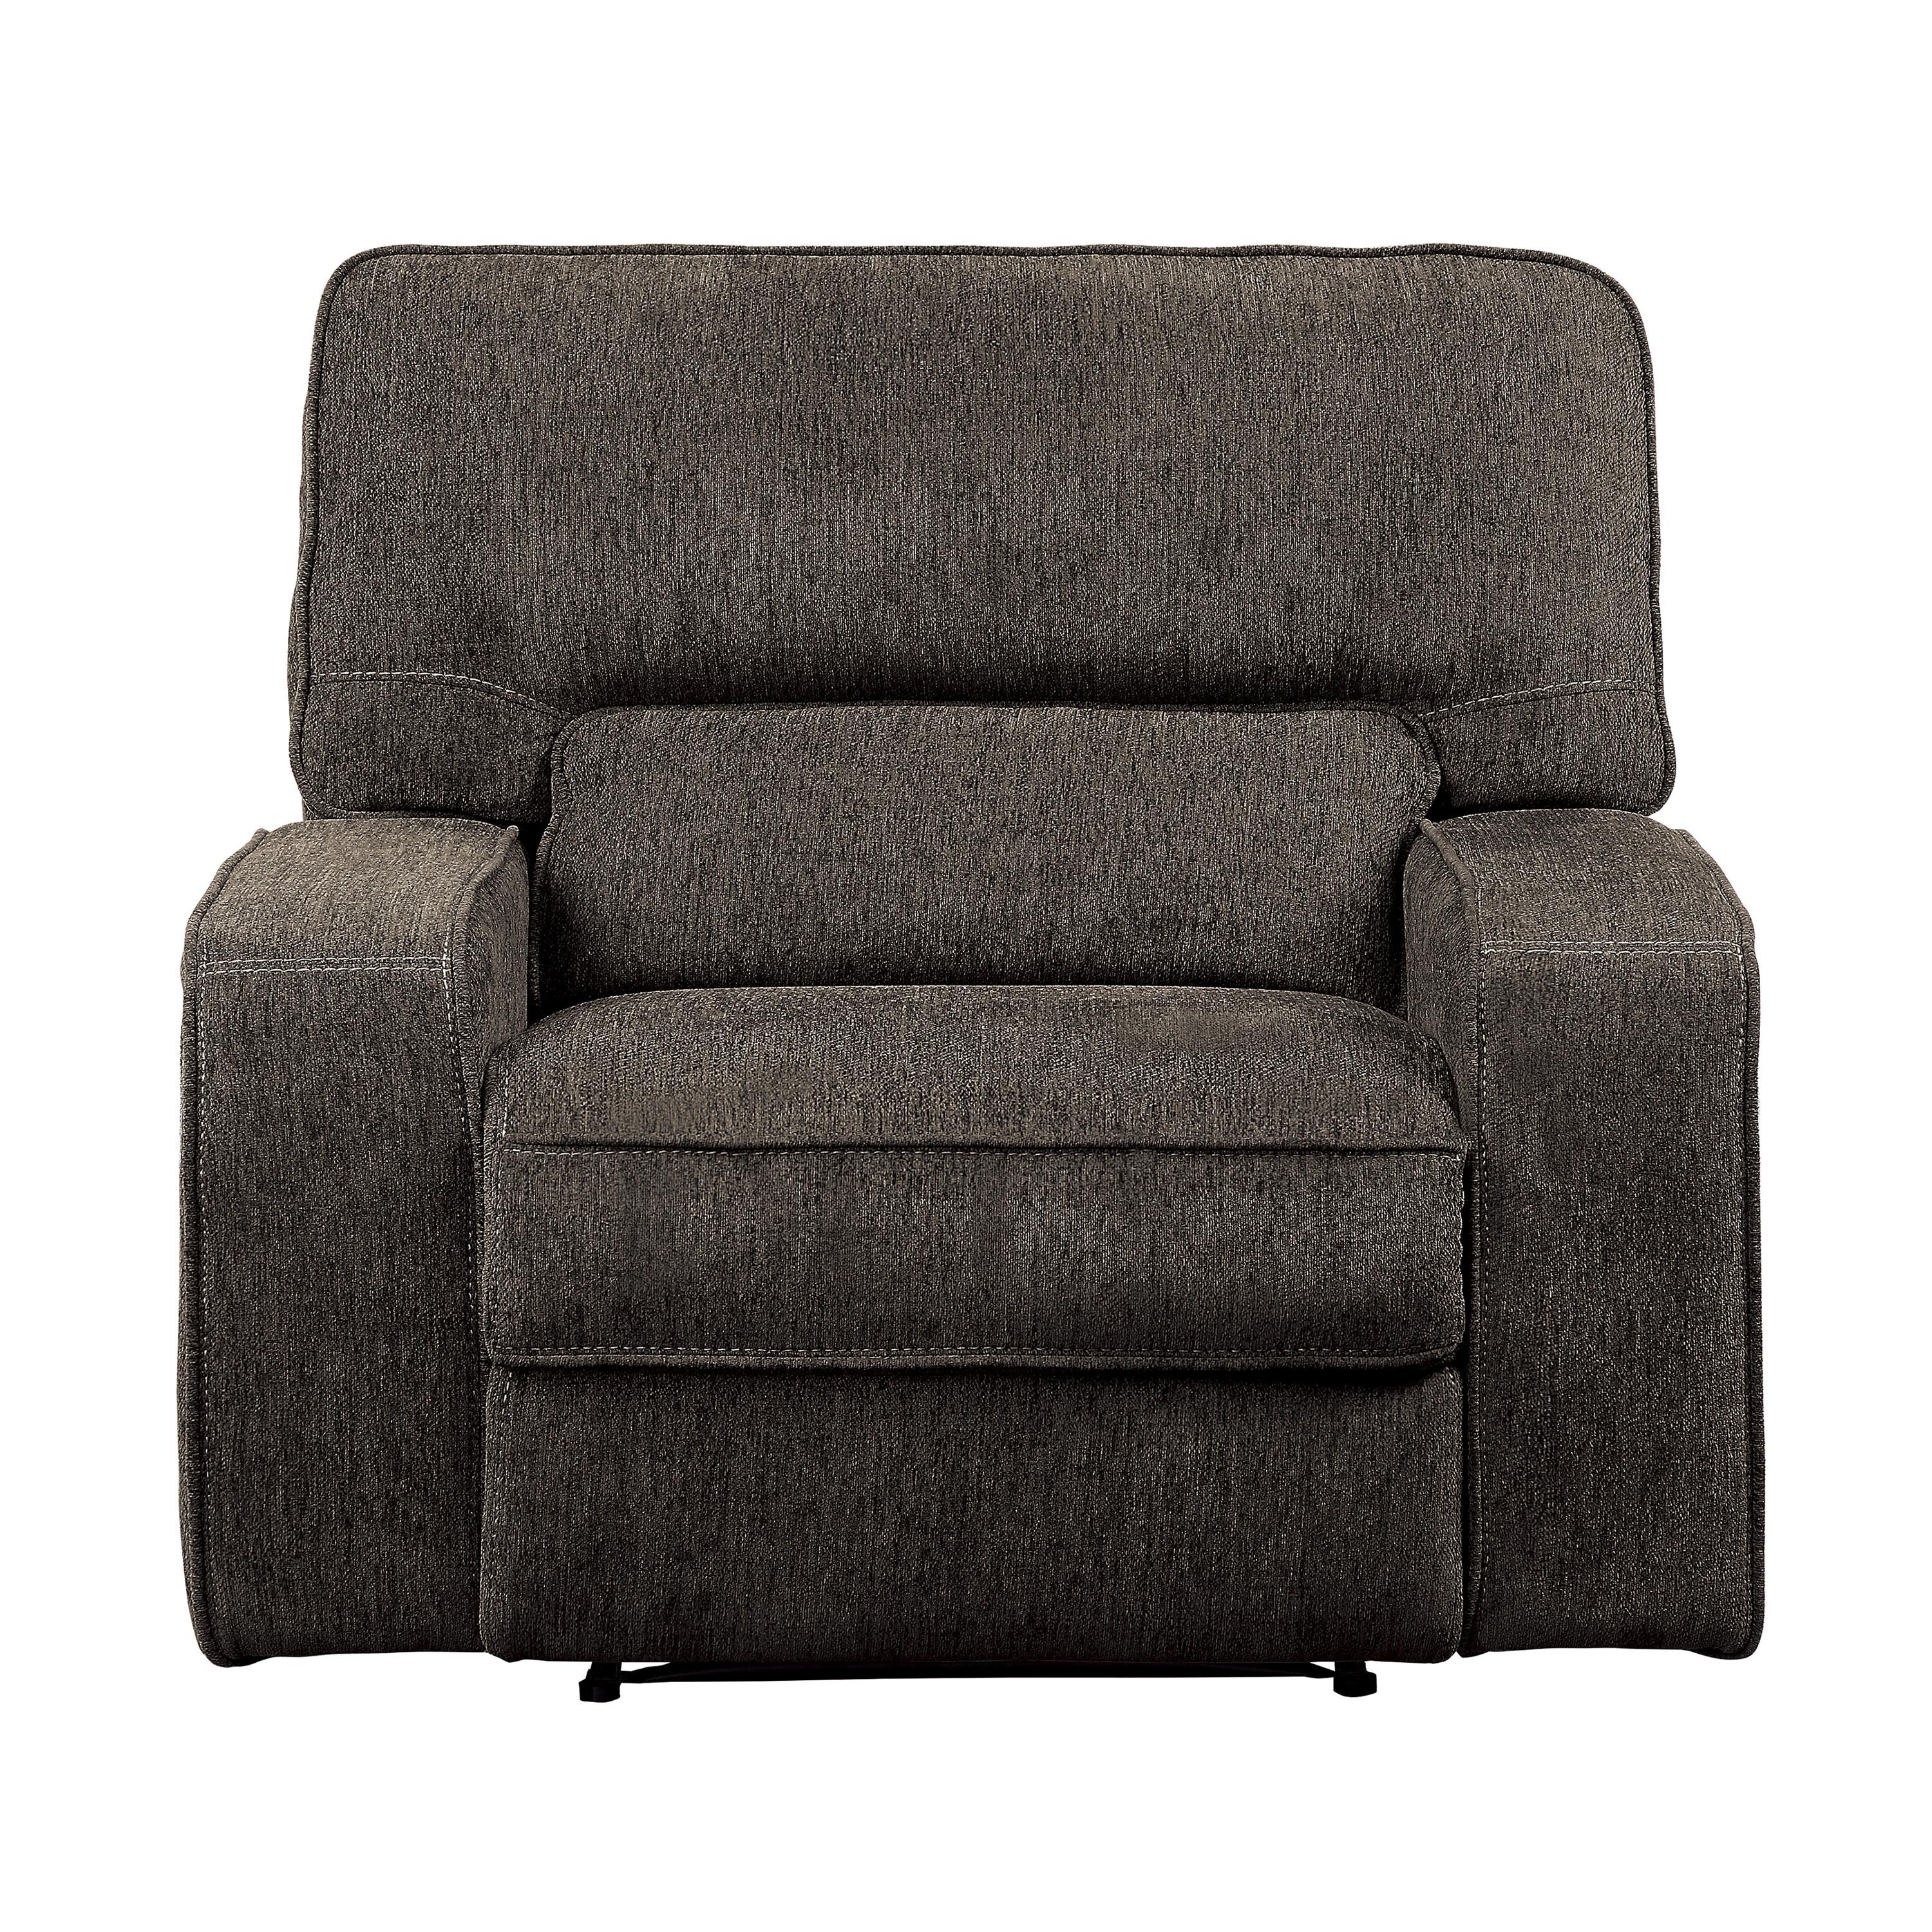 Modern Power Reclining Chair 9849CH-1PWH Borneo 9849CH-1PWH in Chocolate Chenille